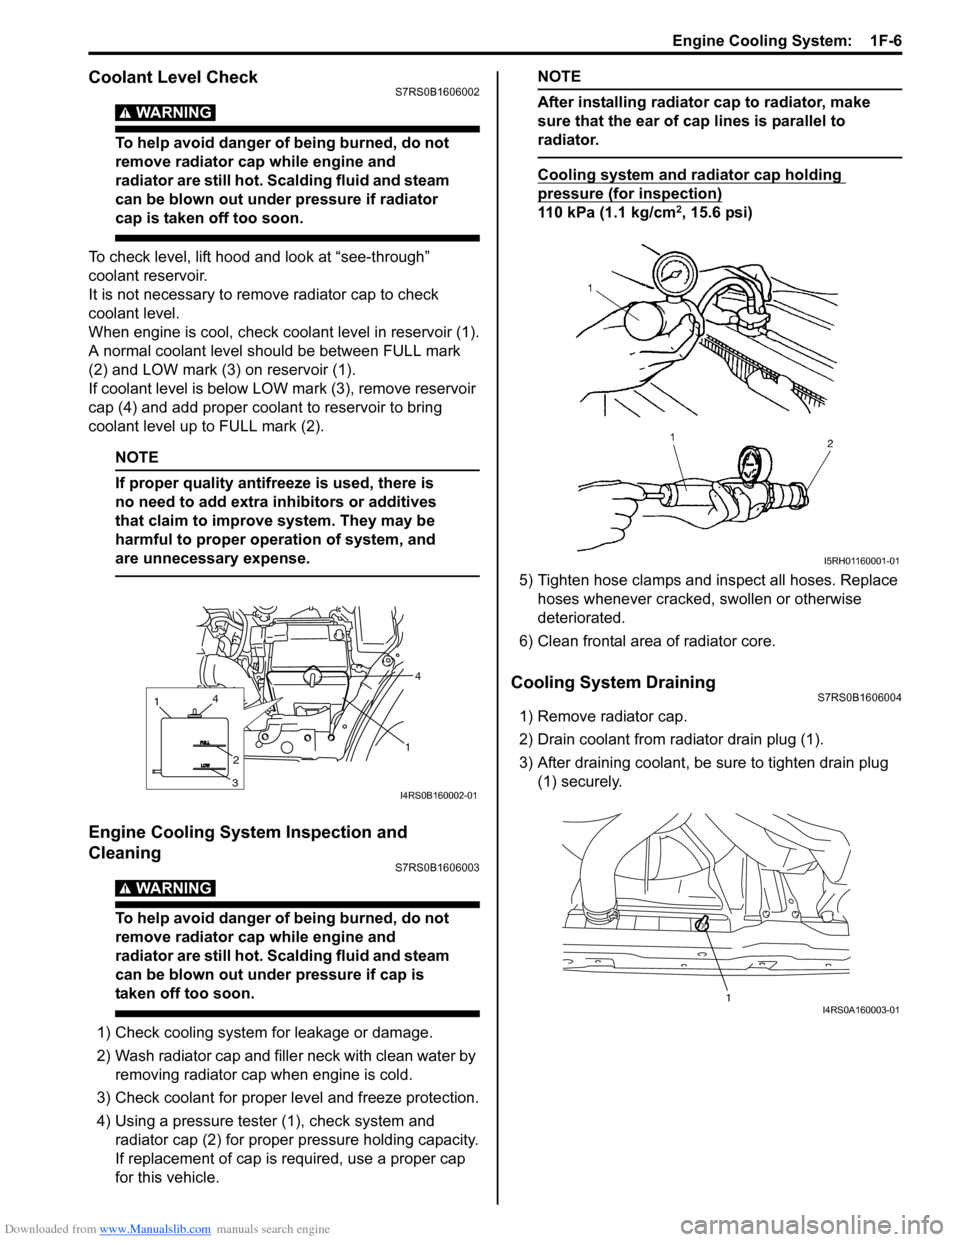 SUZUKI SWIFT 2006 2.G Service Service Manual Downloaded from www.Manualslib.com manuals search engine Engine Cooling System:  1F-6
Coolant Level CheckS7RS0B1606002
WARNING! 
To help avoid danger of being burned, do not 
remove radiator cap while